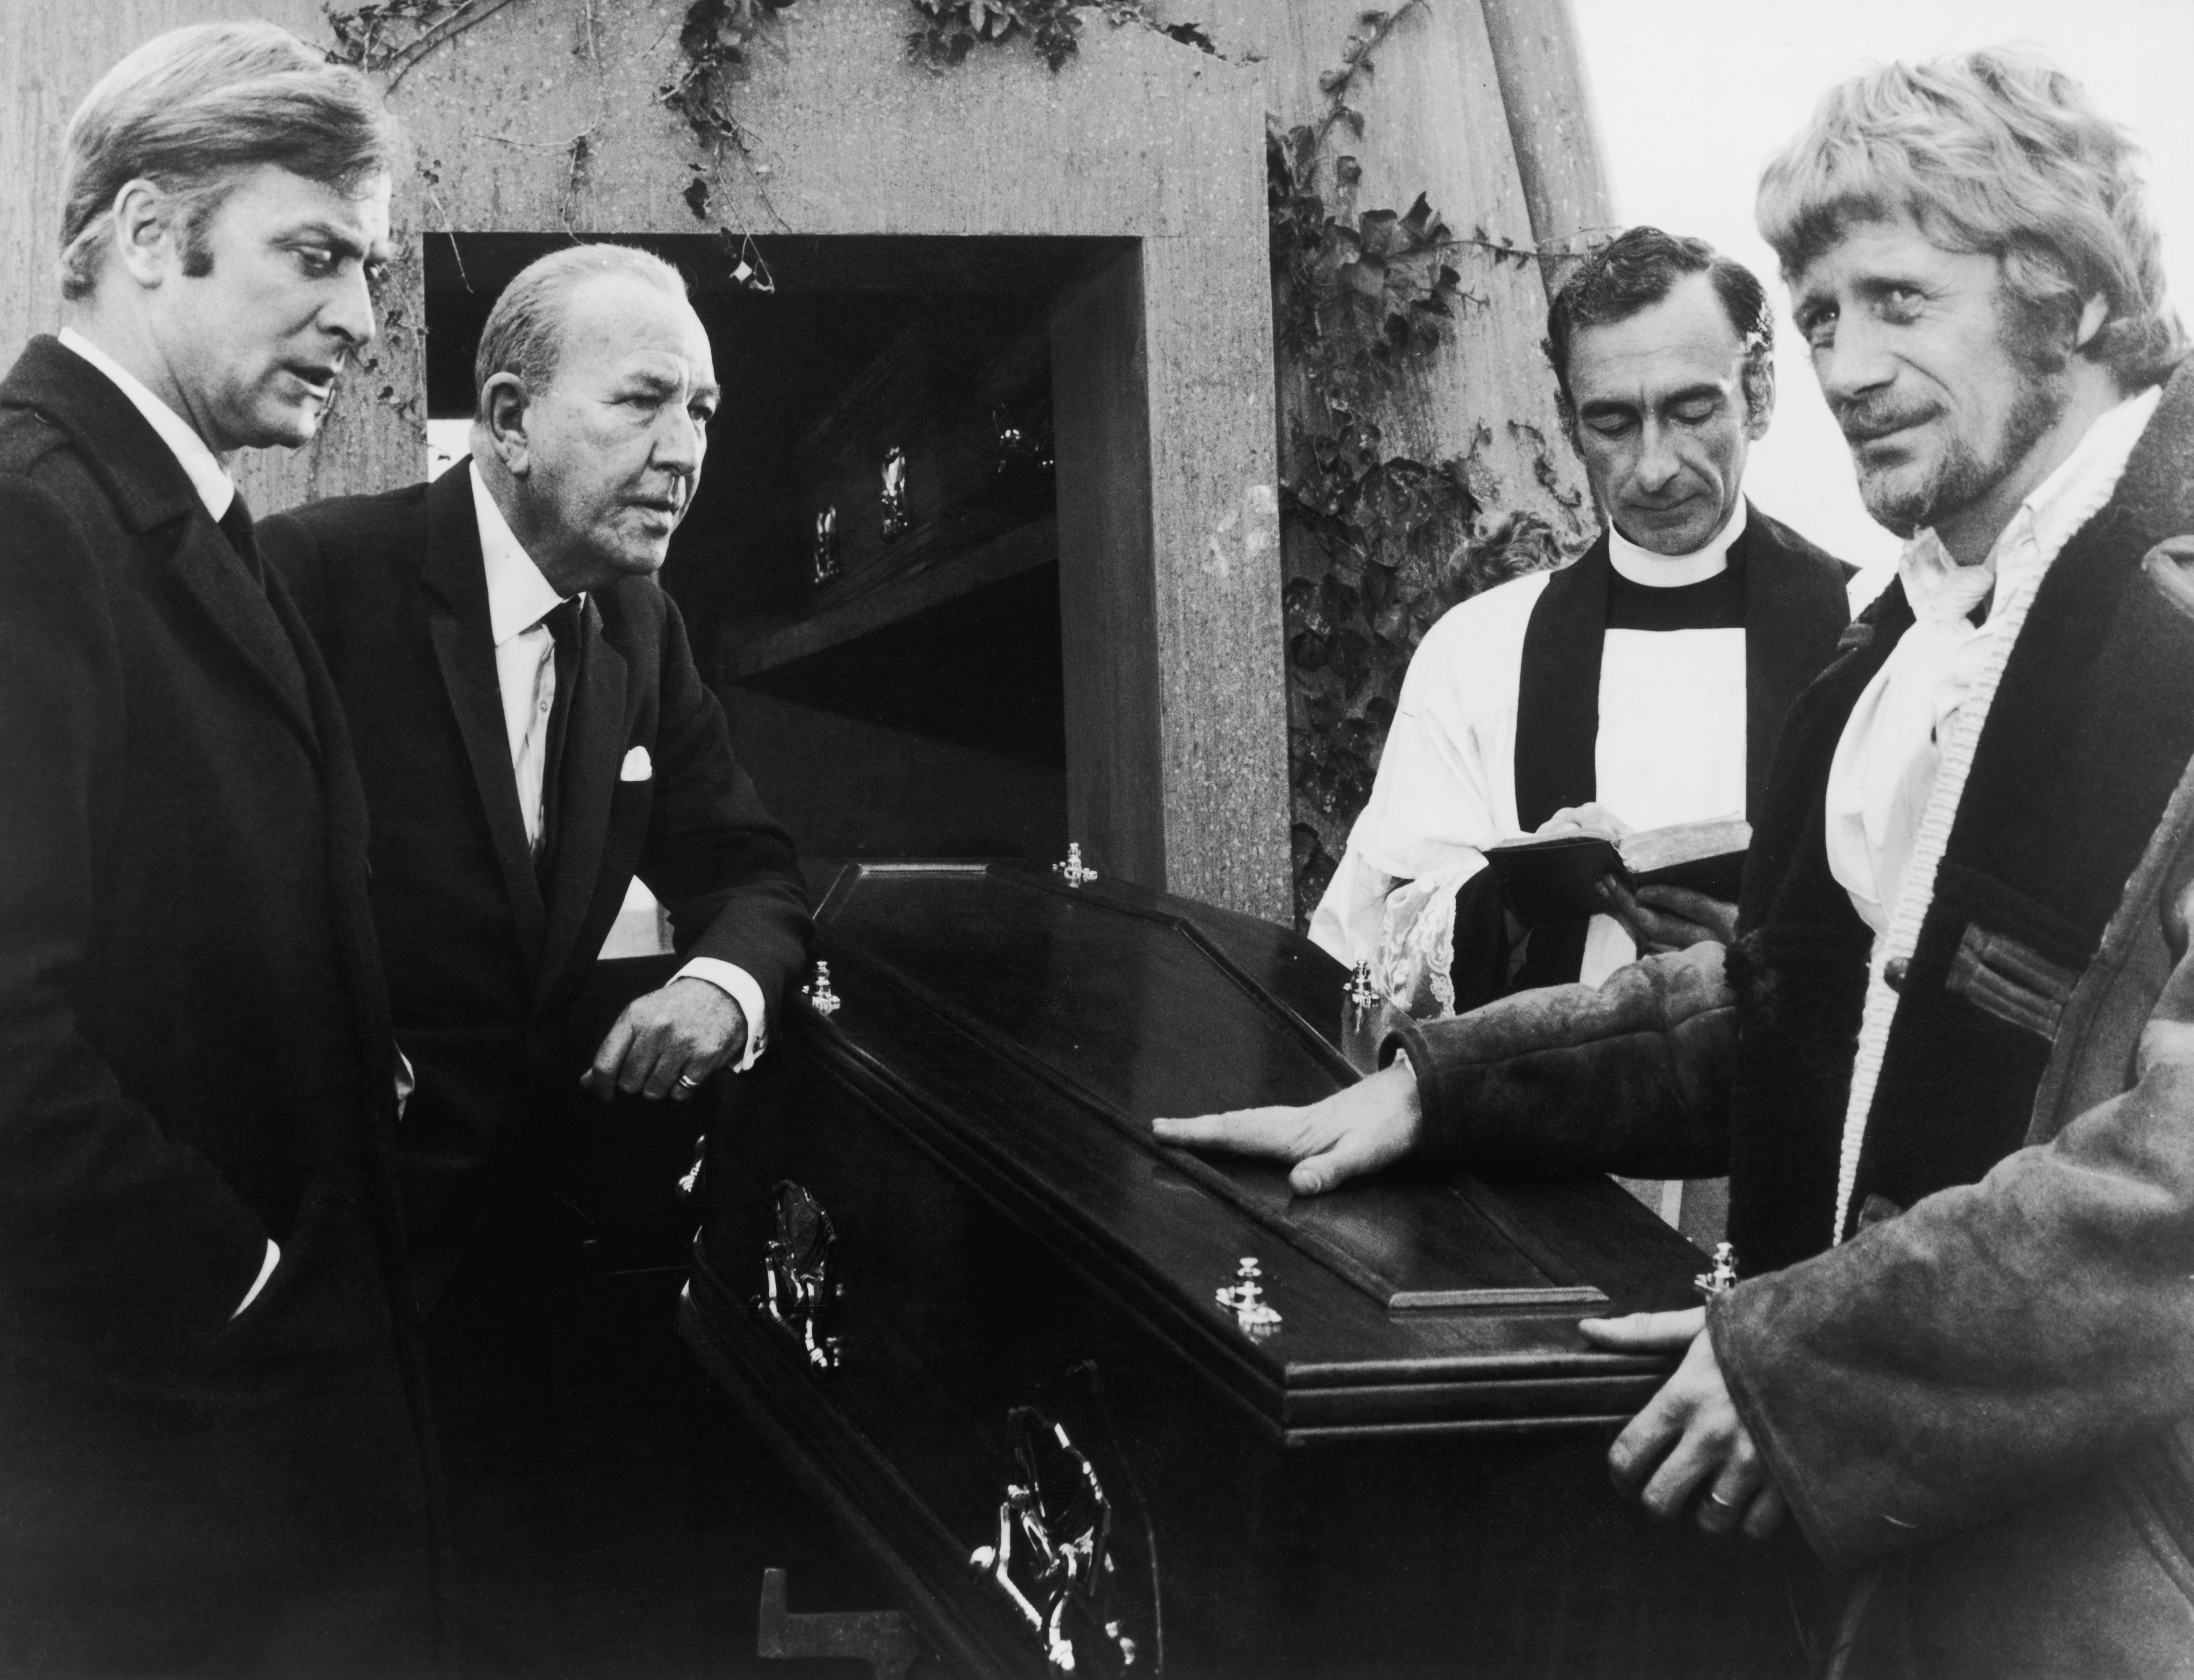 Michael Caine, Noël Coward, Peter Collinson, and David Kelly in The Italian Job (1969)